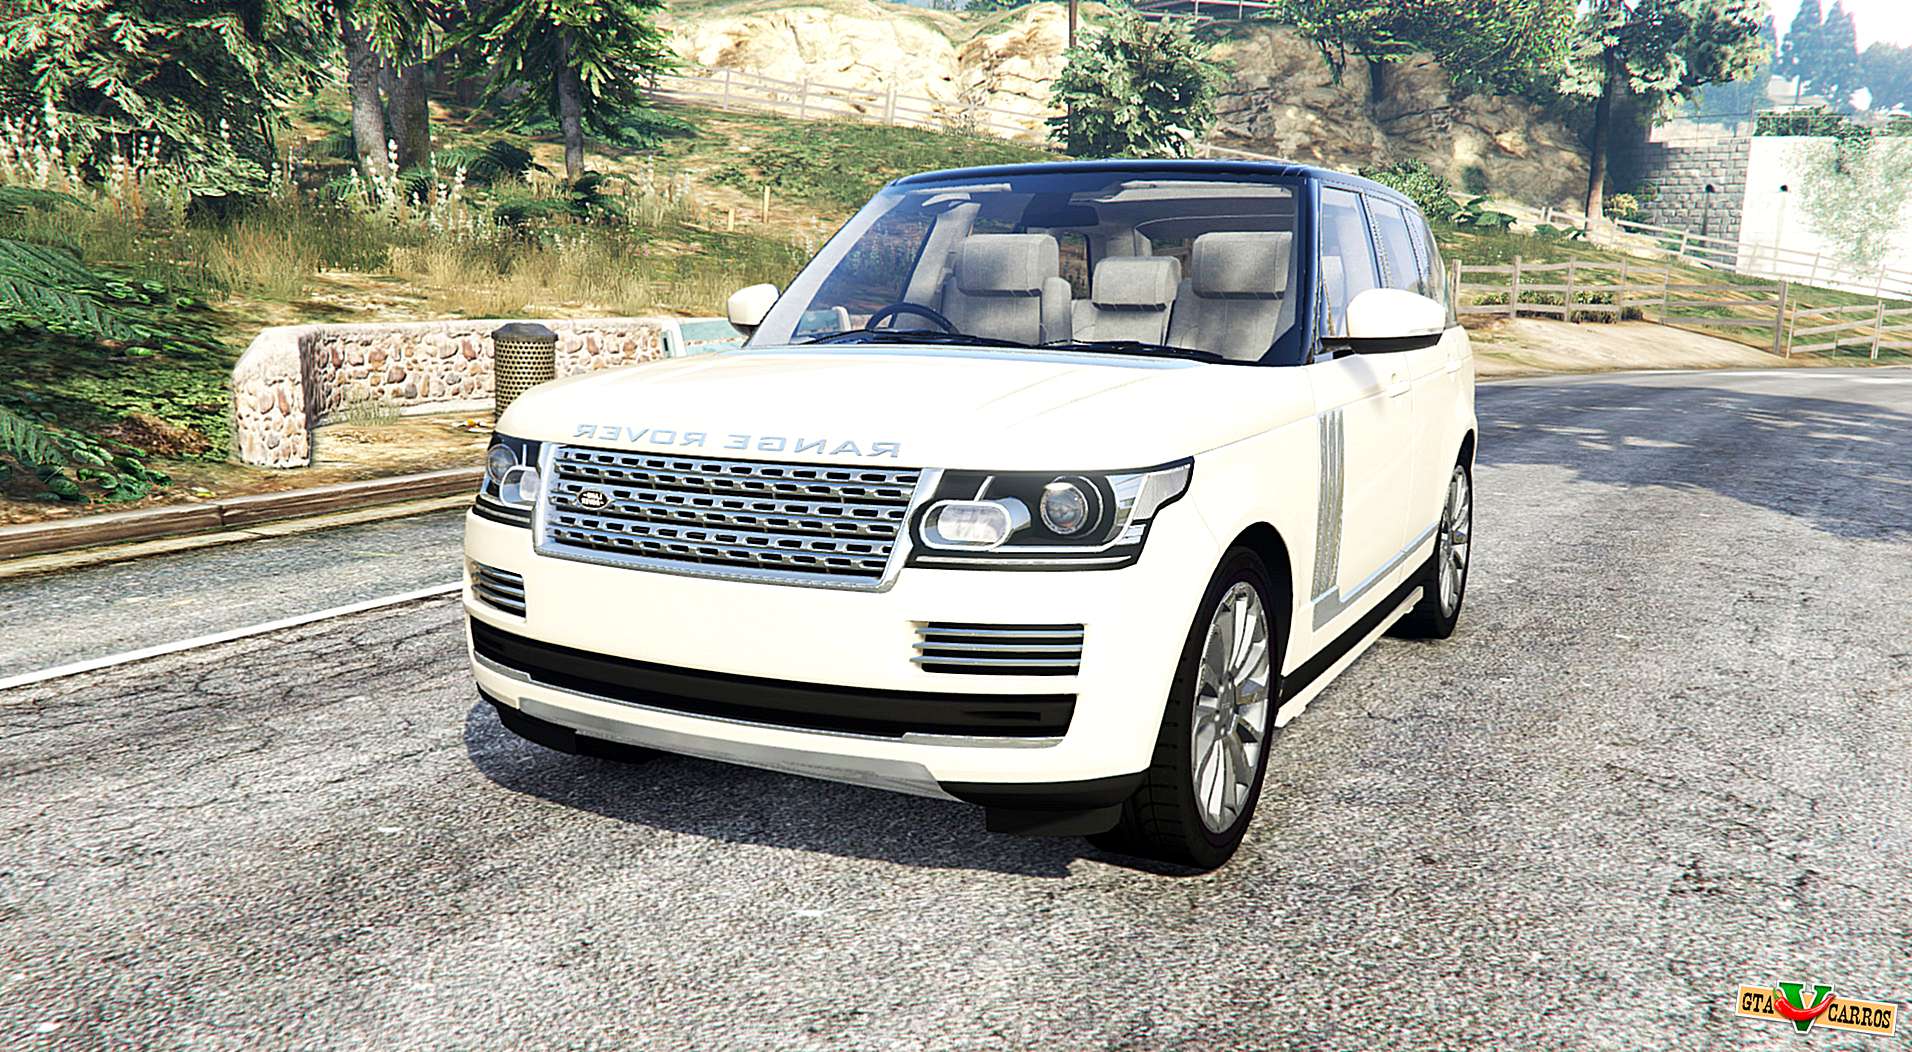 Land rover in gta 5 фото 35